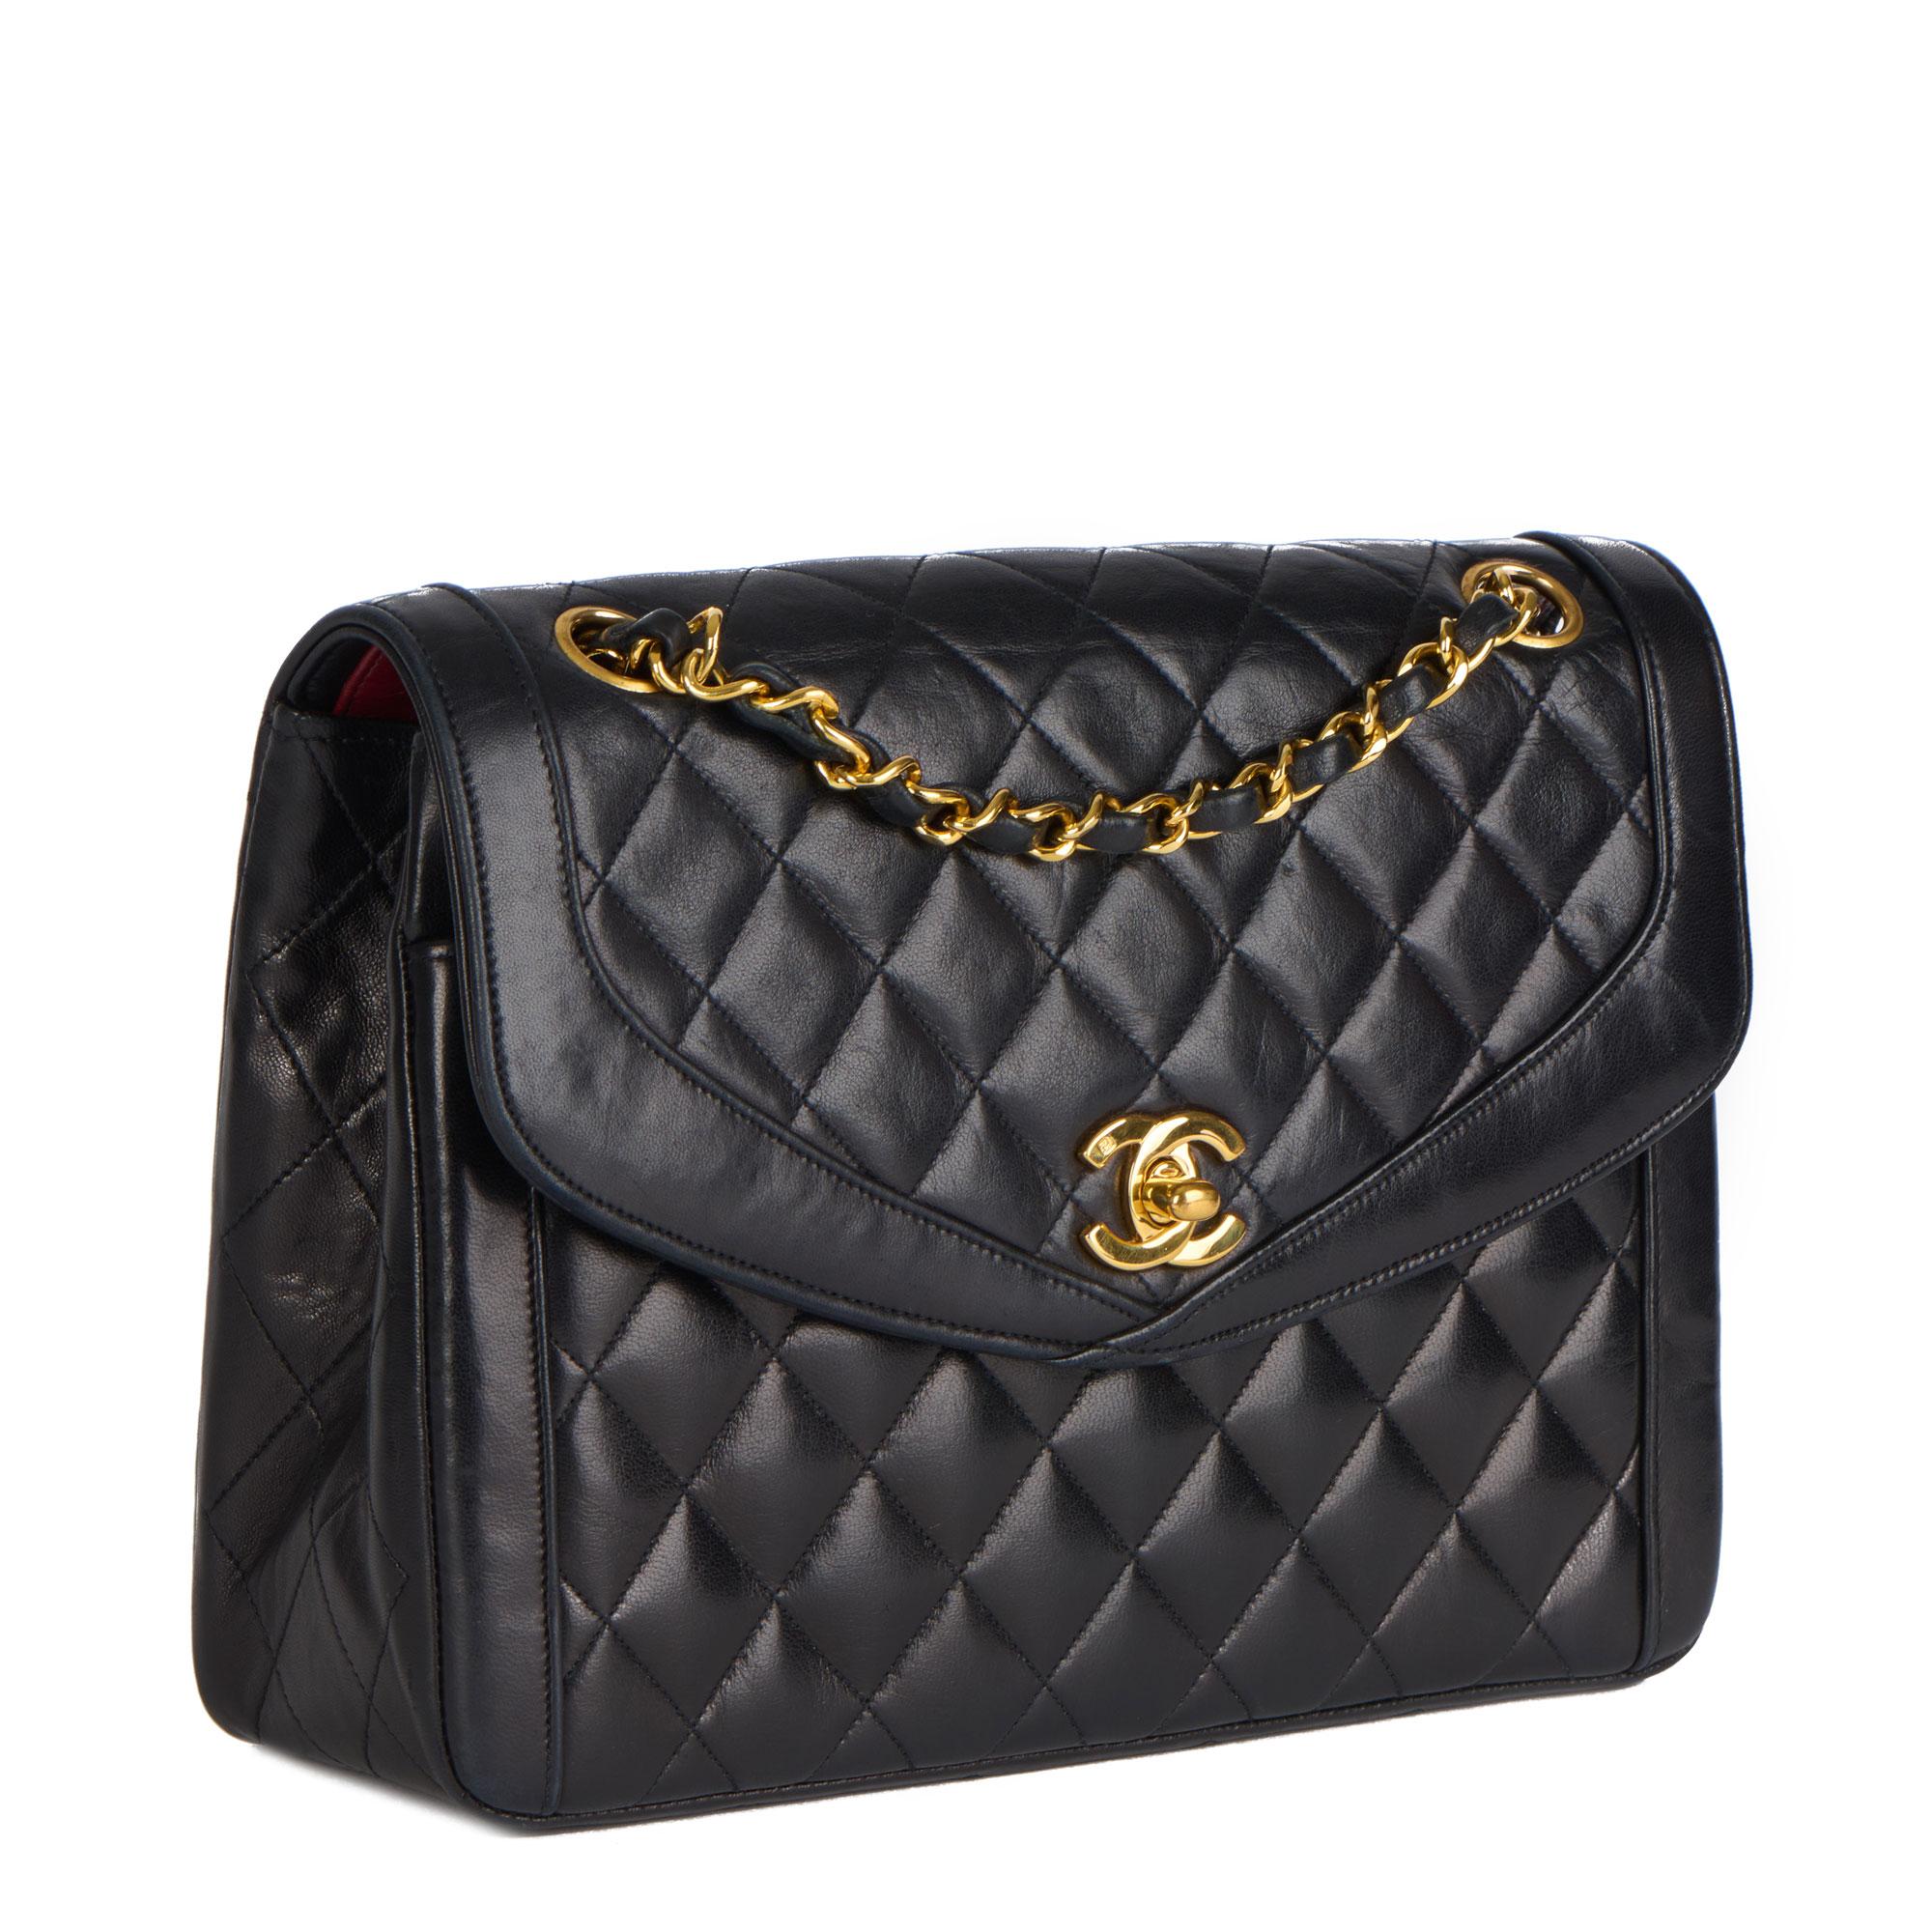 CHANEL Black Quilted Lambskin Vintage Small Classic Single Flap Bag 9